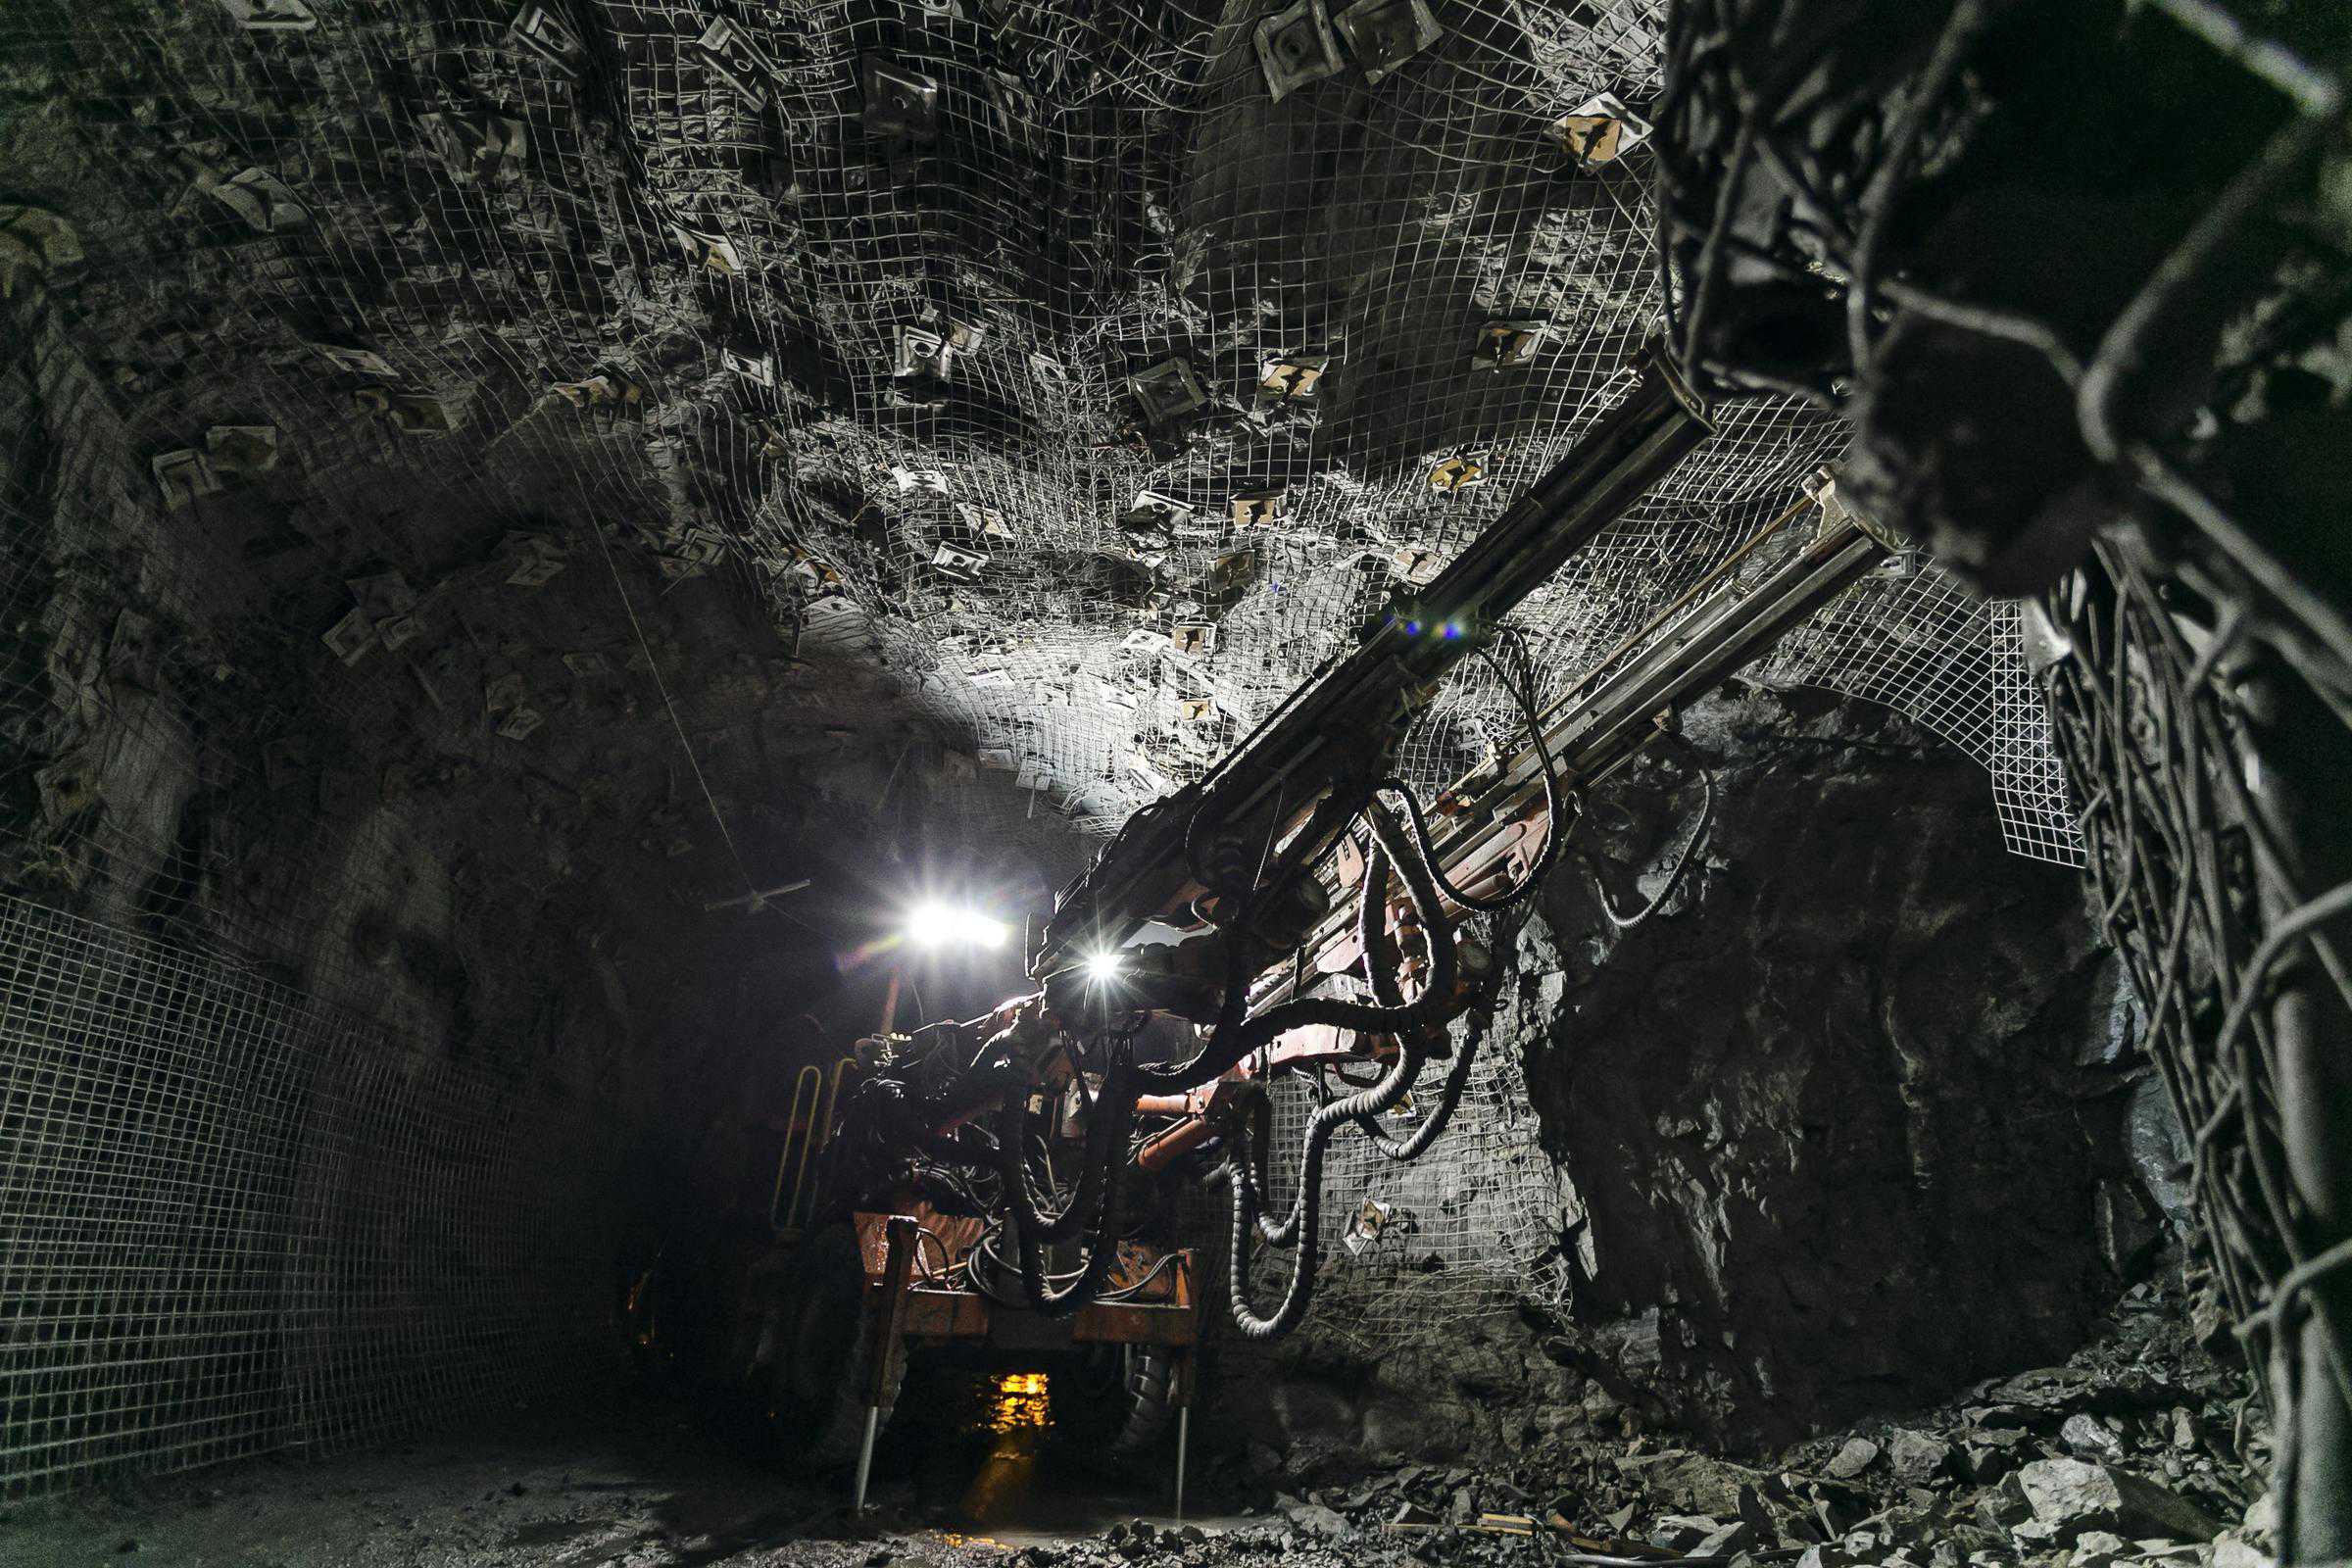 An underground mining machine operates in a dimly lit tunnel, with rock walls reinforced by wire mesh, leveraging advanced methods from the Tunnelling Library.